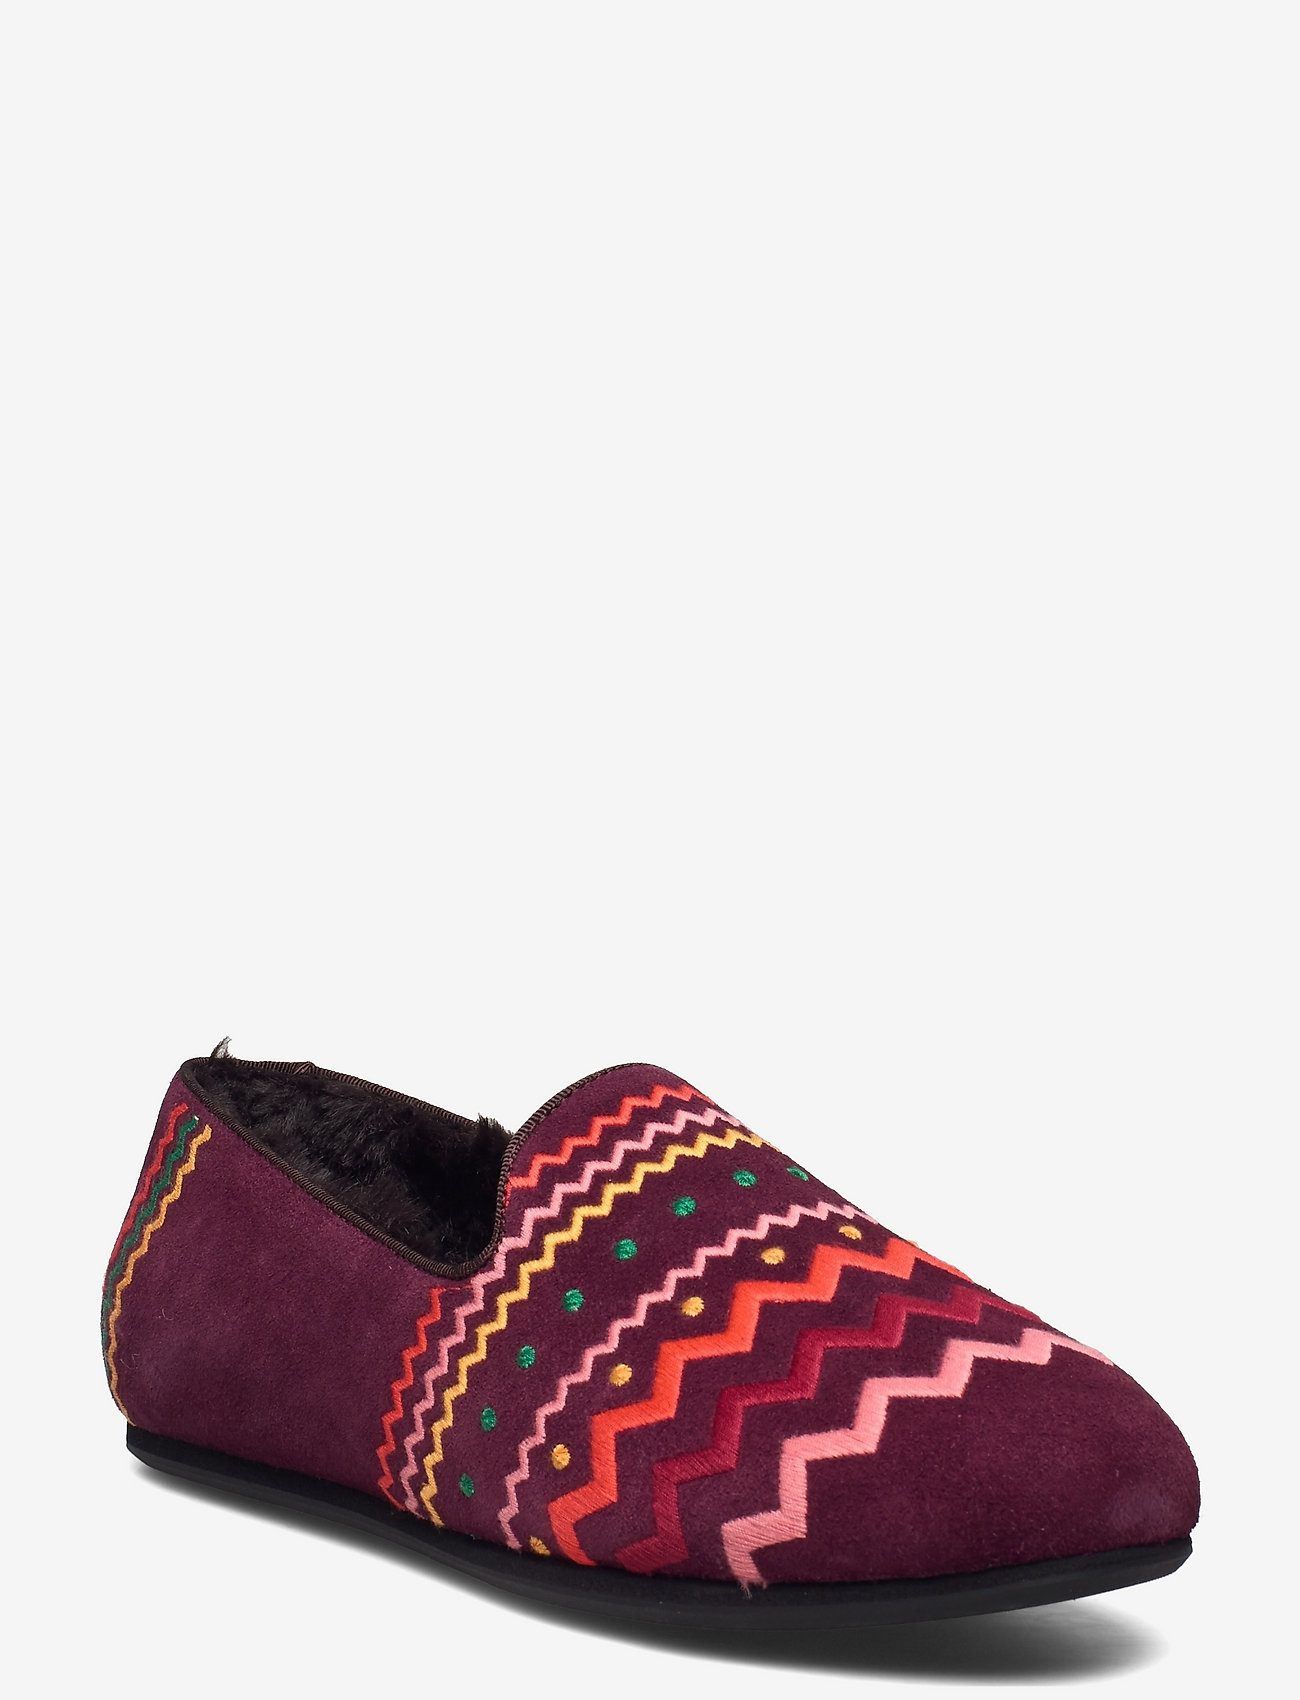 Hums - Hums color zigzag loafer - birthday gifts - red - 0